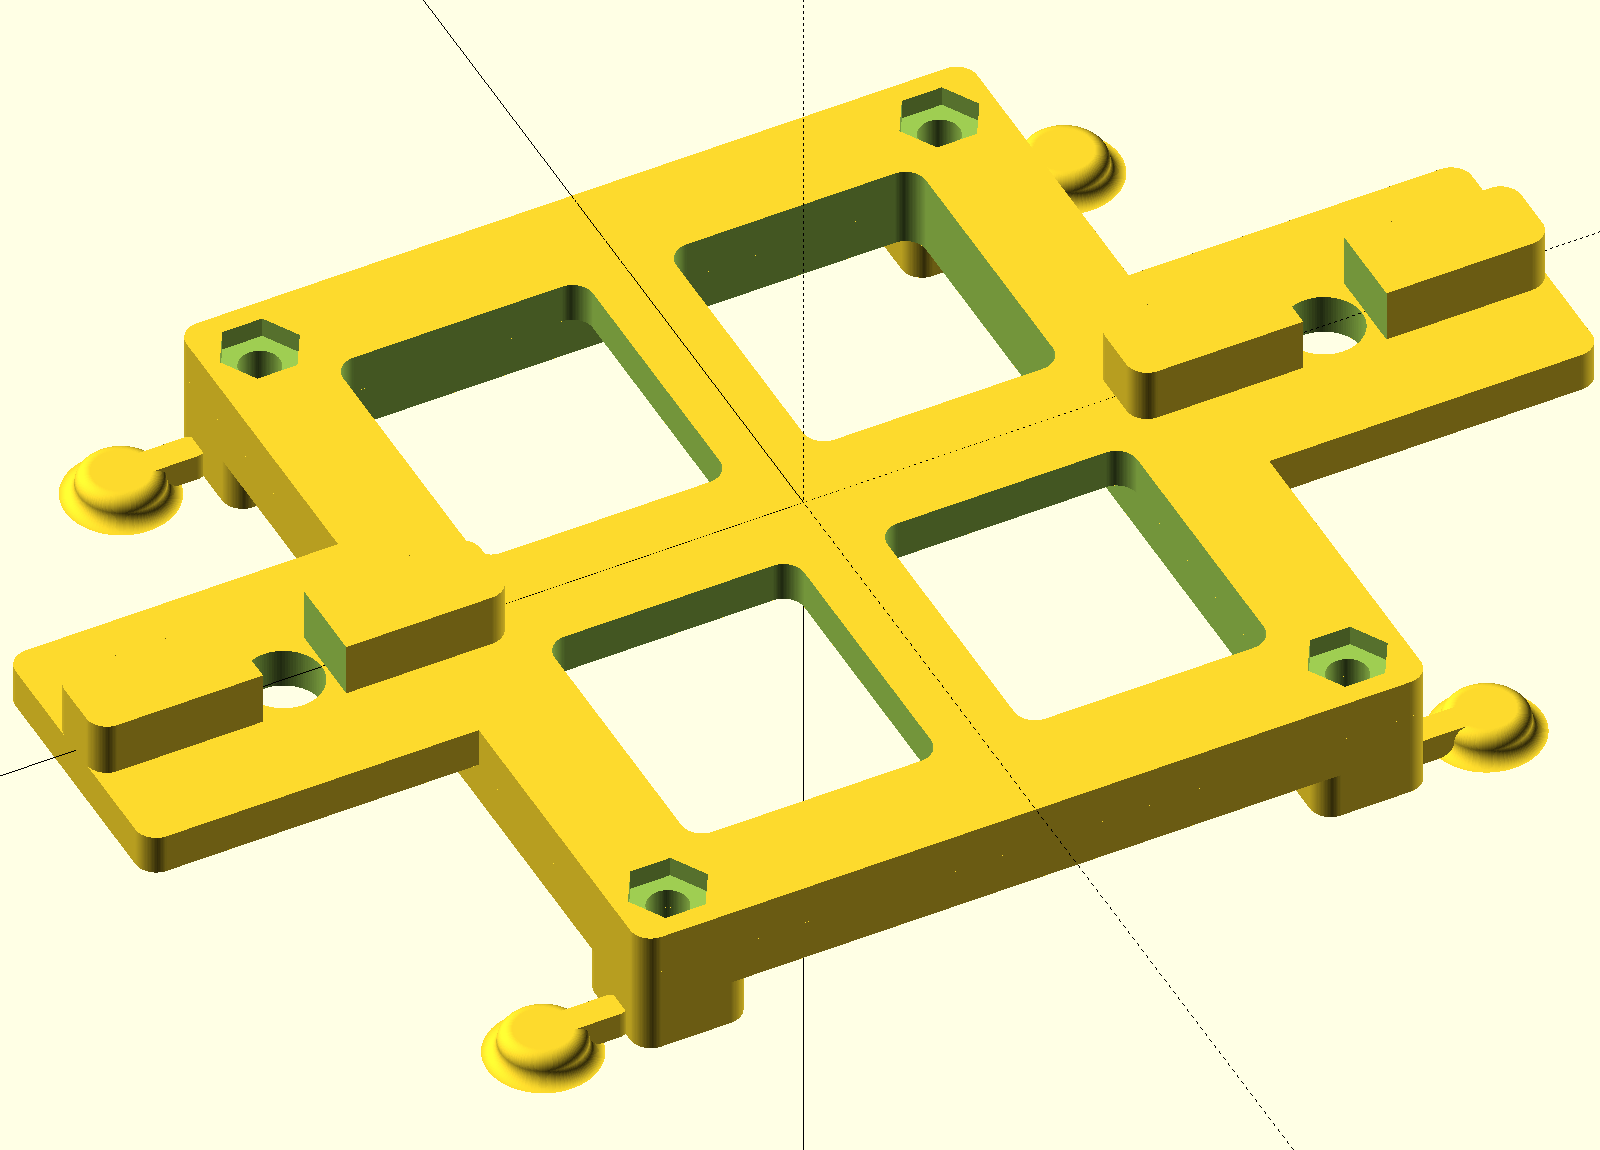 CAD render of the bracket with 3d printing extras